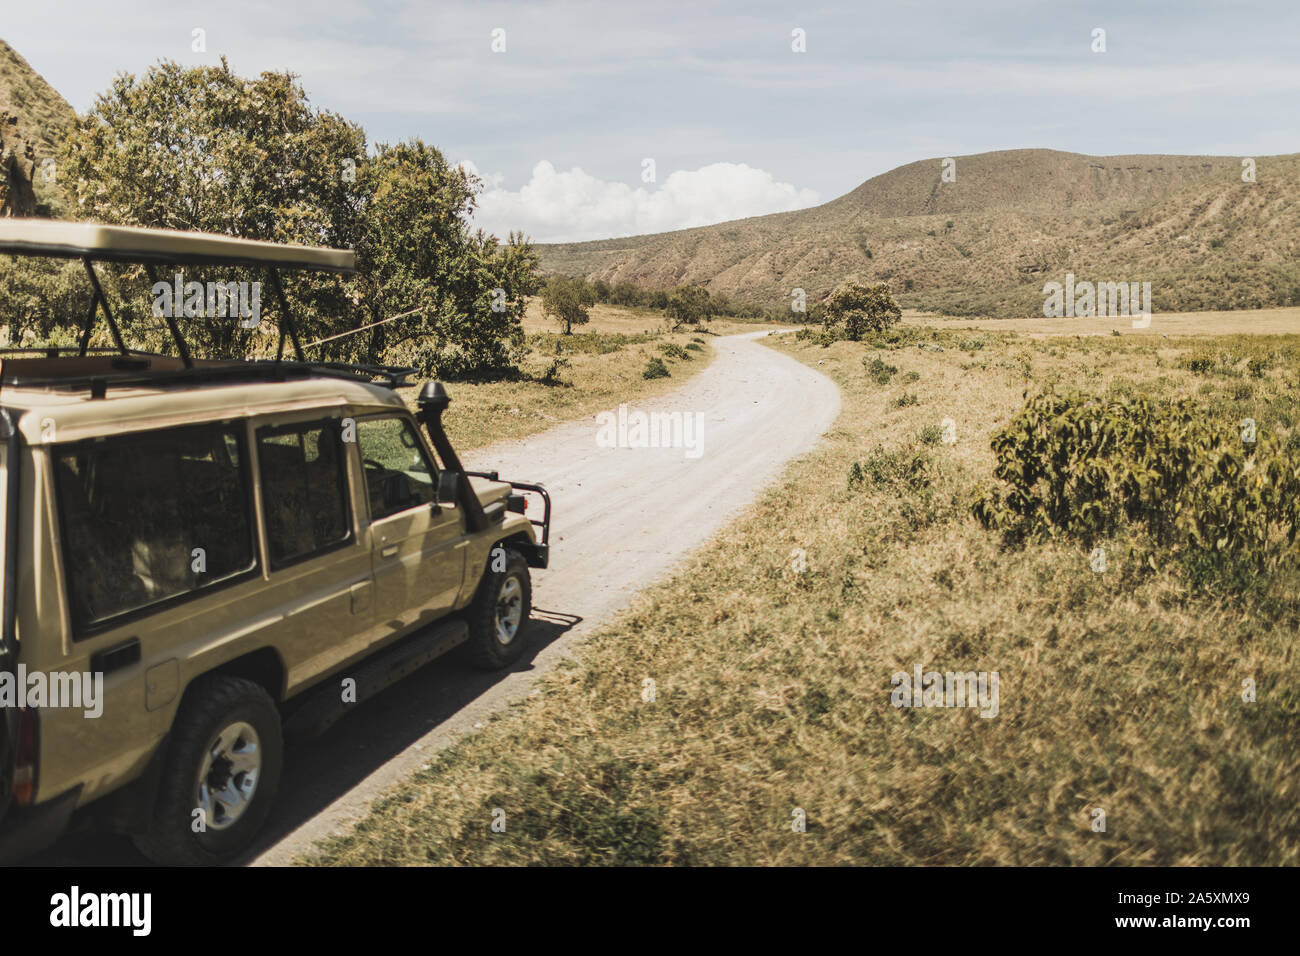 Safari in Hell's Gate national park in Kenya. Off road jeep car, savanna and mountain view. Explore wilderness of Africa. Stock Photo